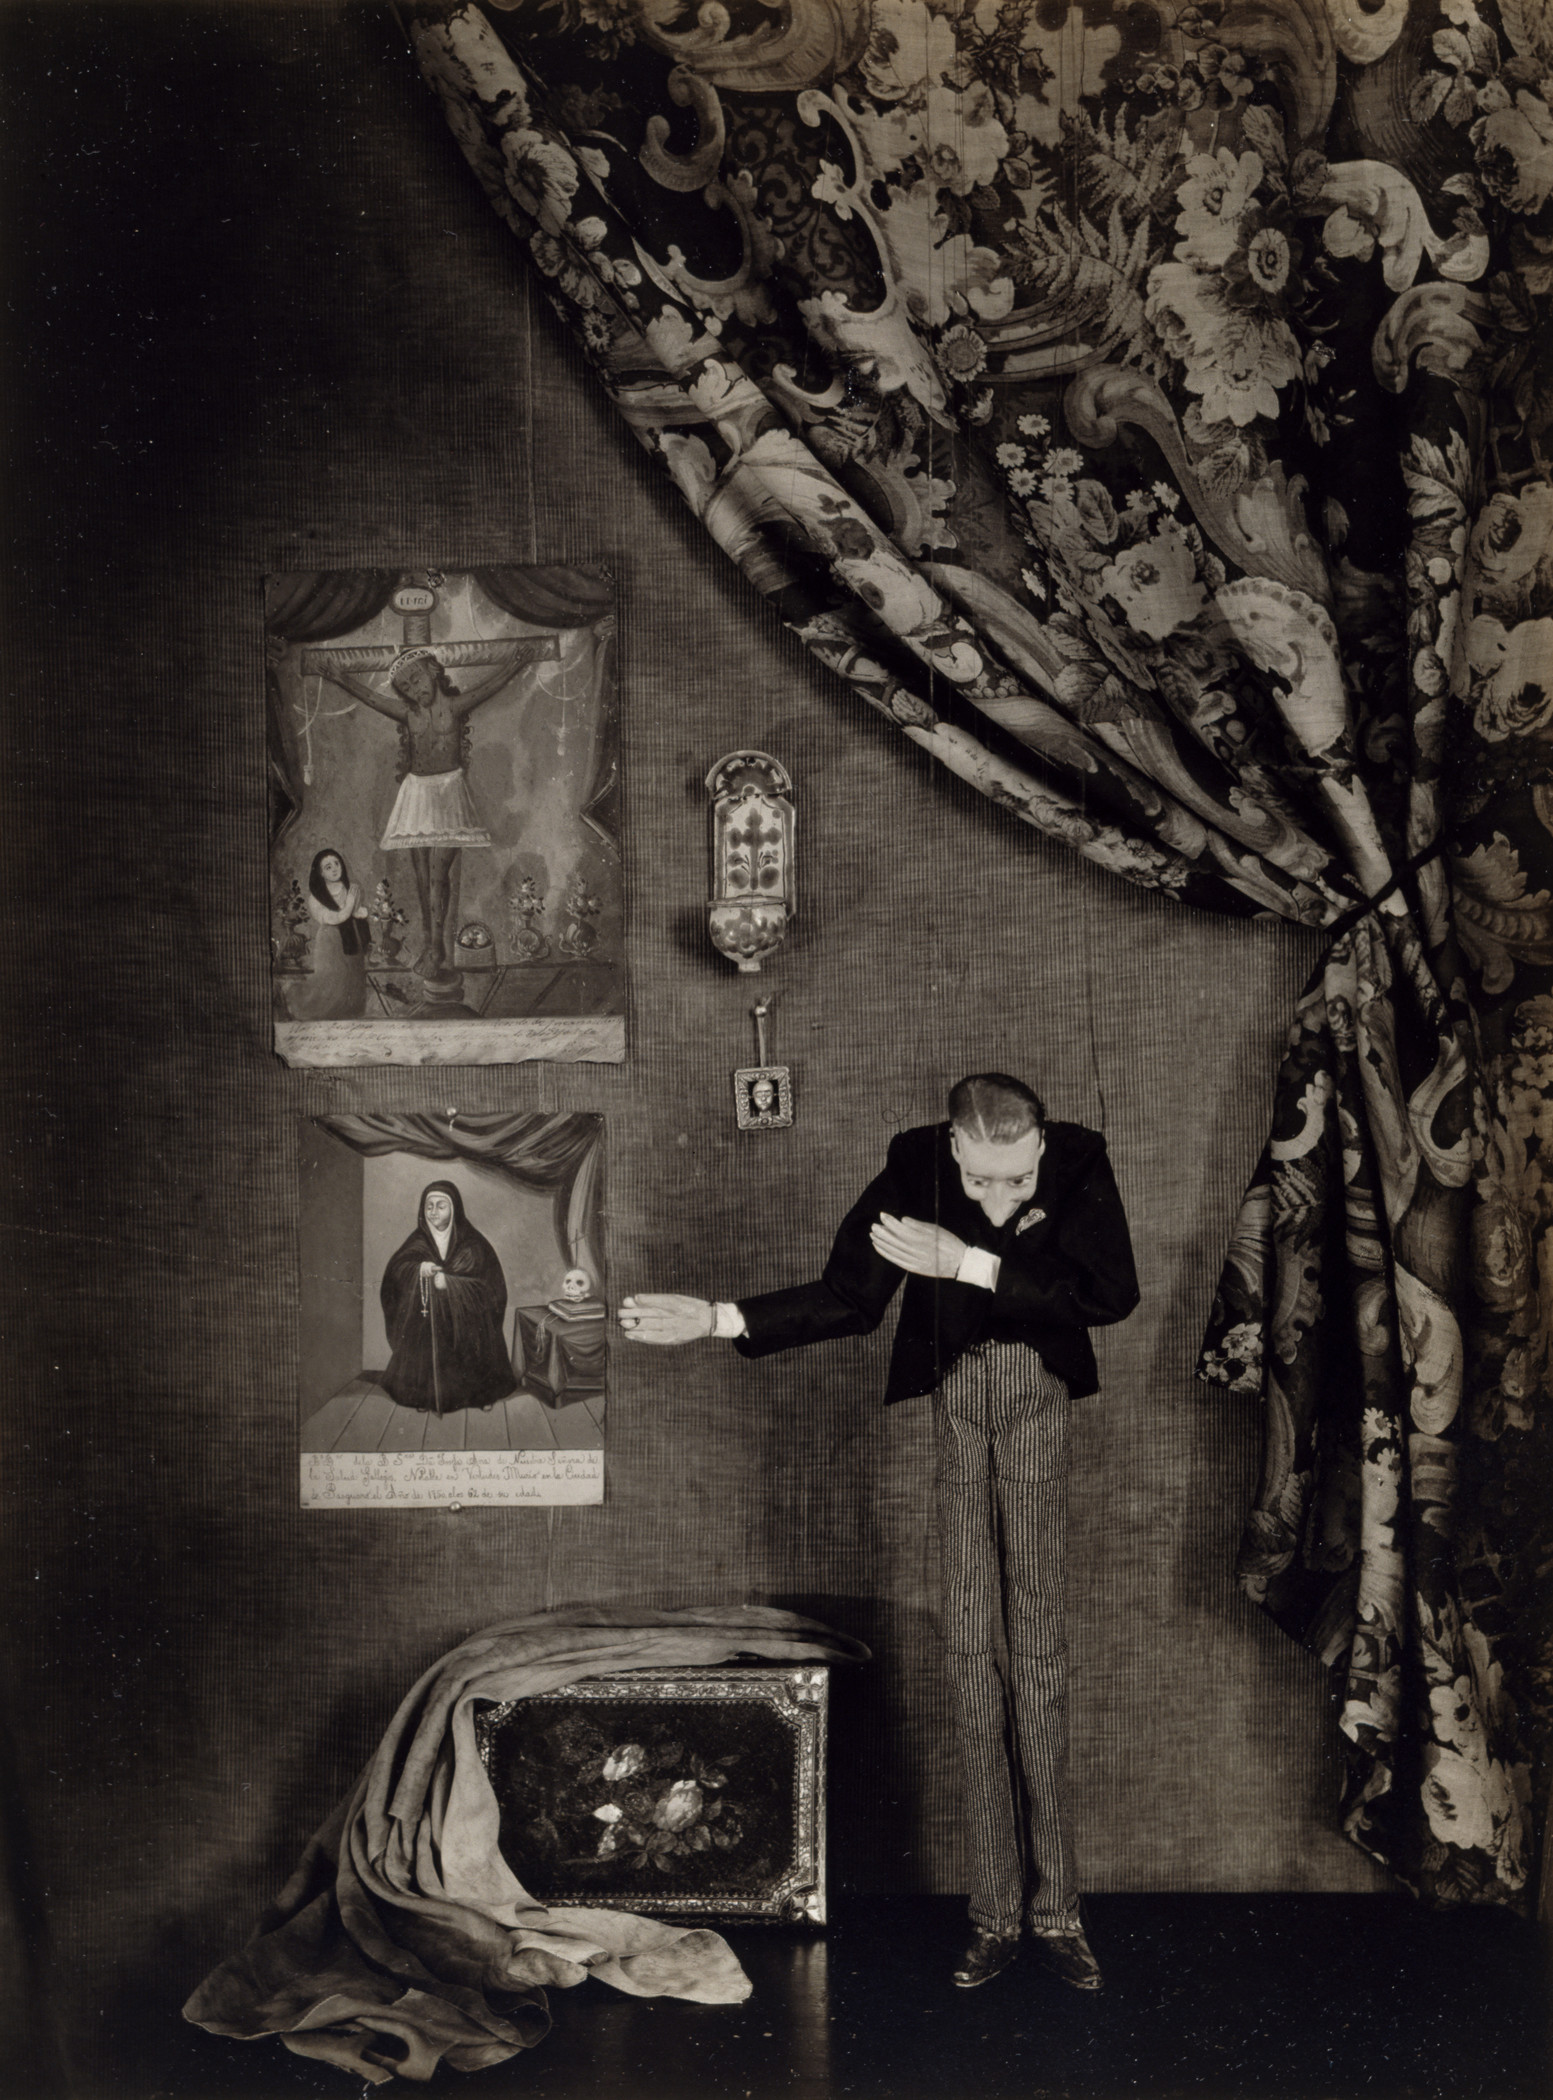 A black and white photograph with a marionette in a suit bowing, next to artworks